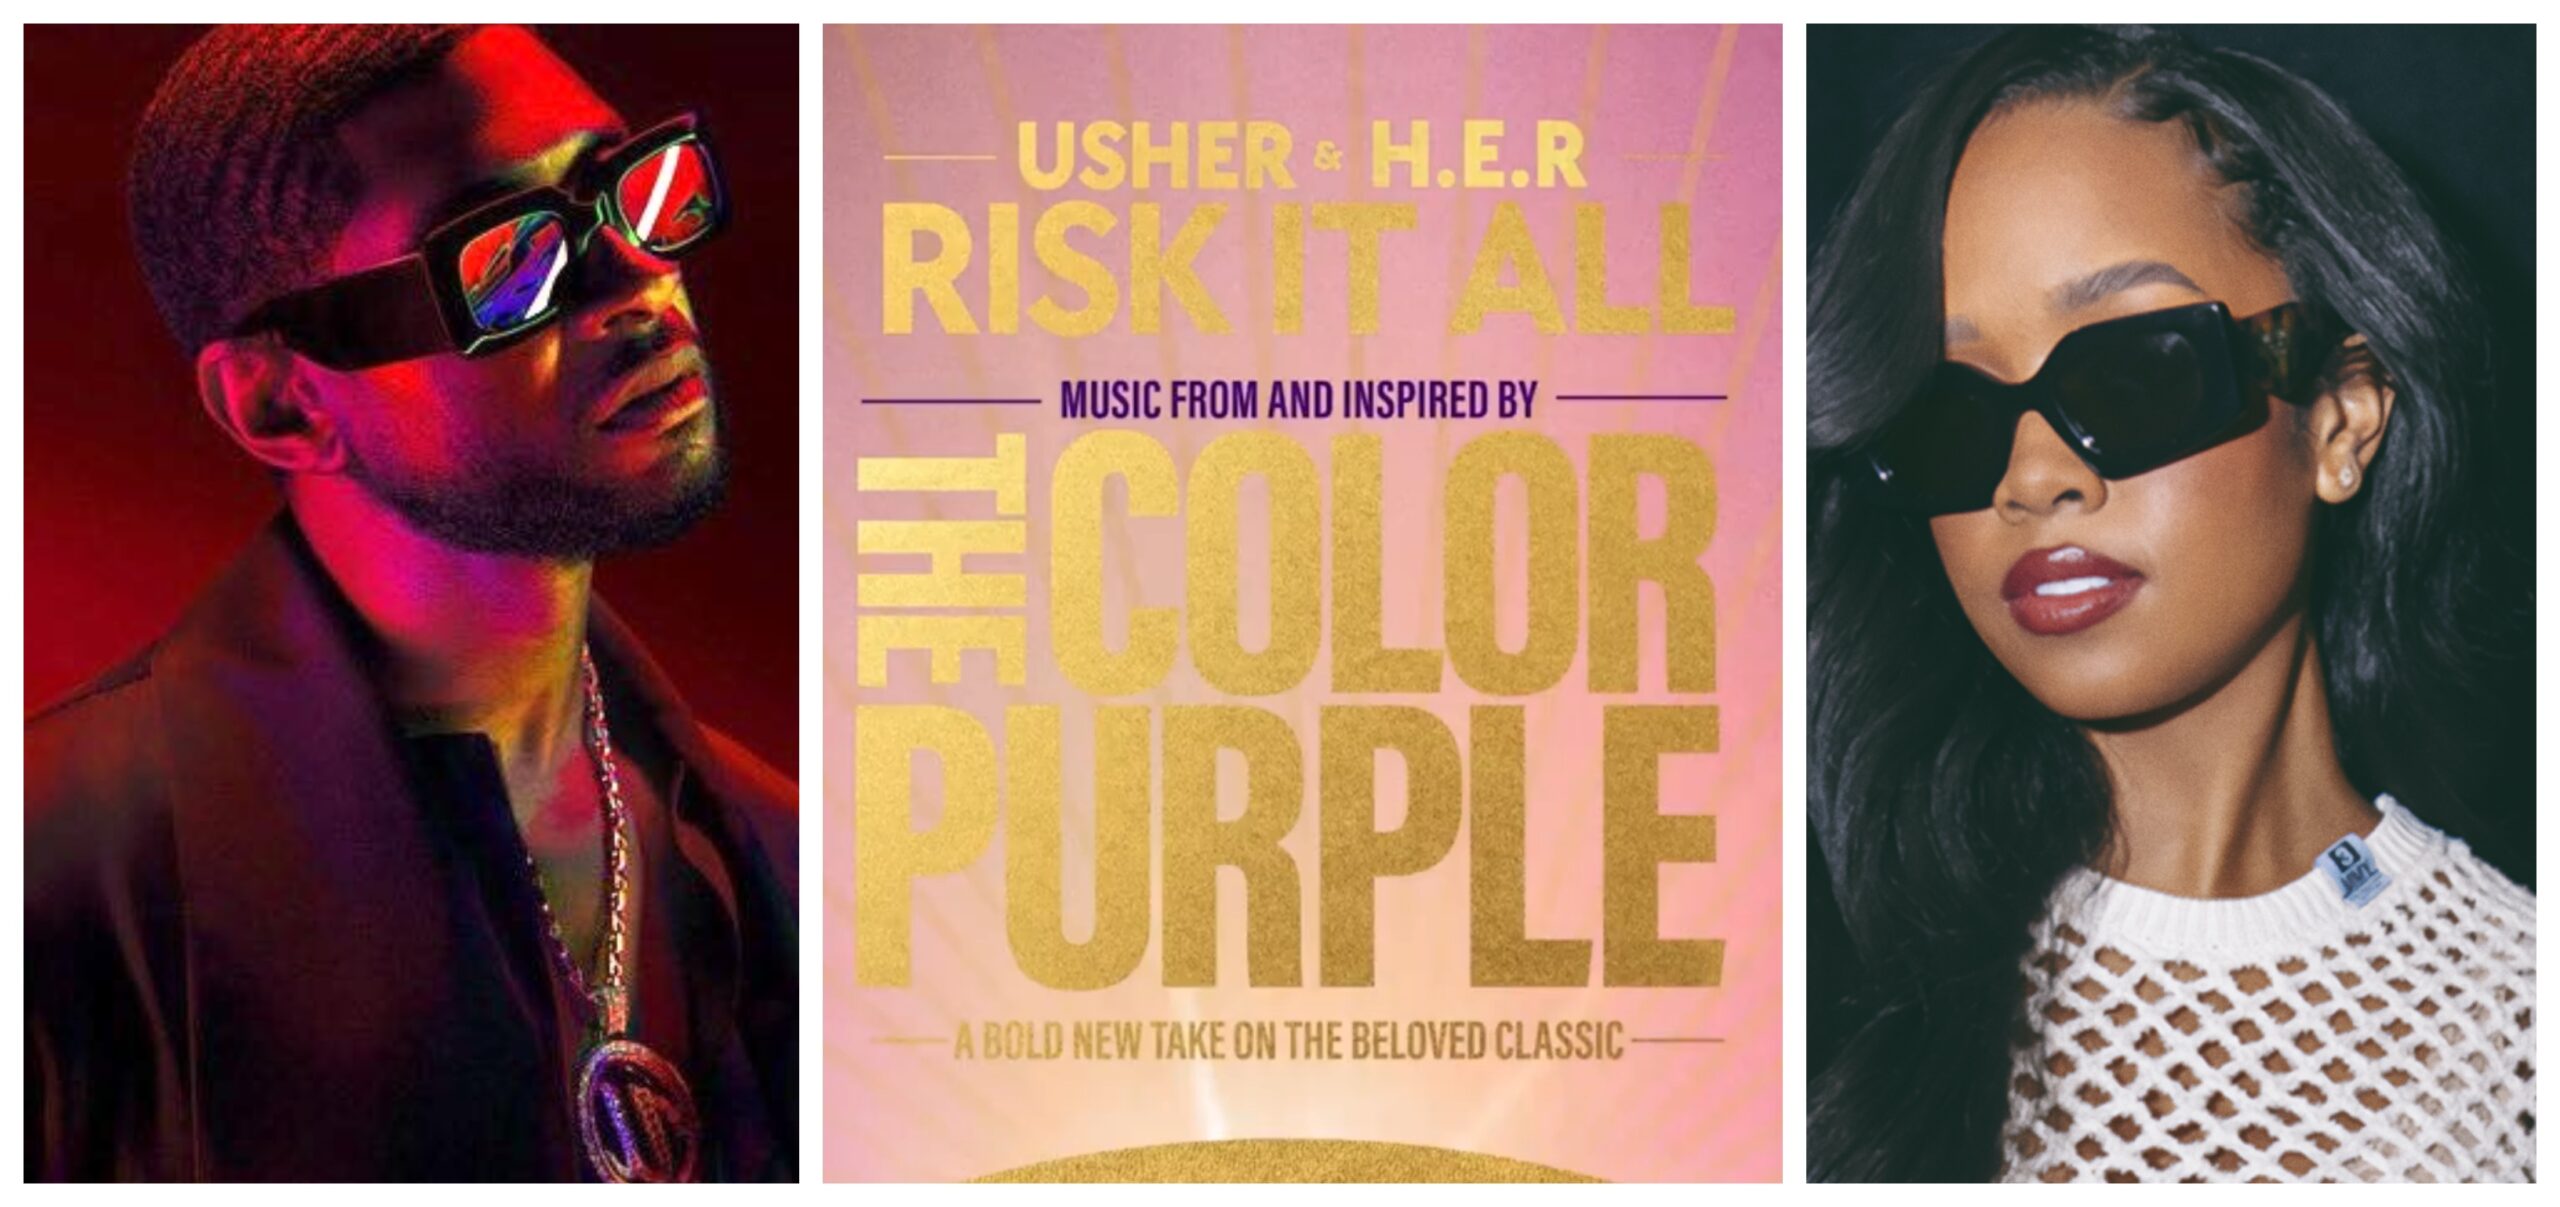 New Song Usher & H.E.R. 'Risk It All' ['The Color Purple' Soundtrack